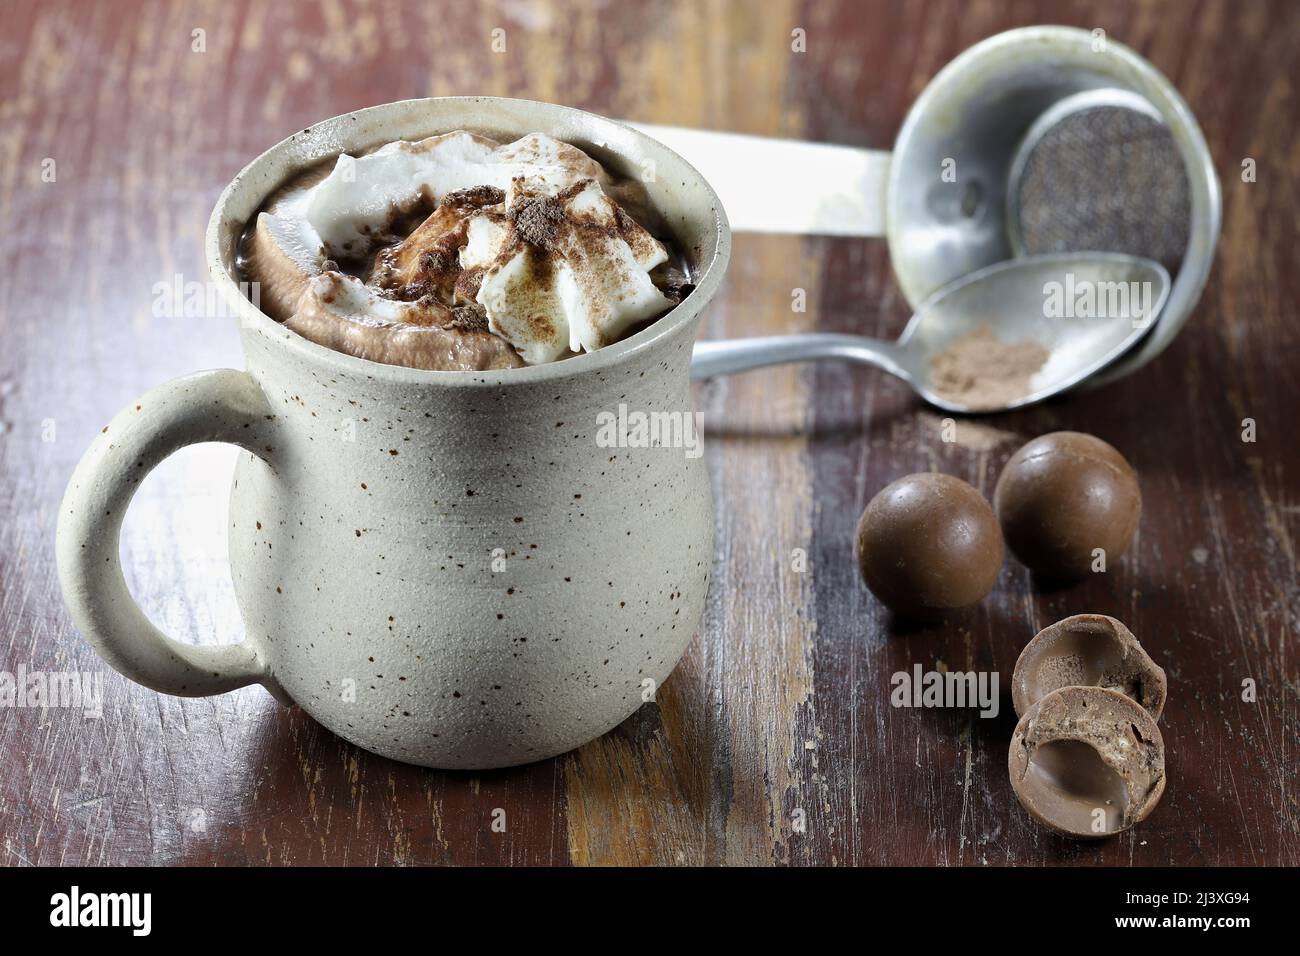 hot chocolate drink in a fictile mug on wooden background Stock Photo